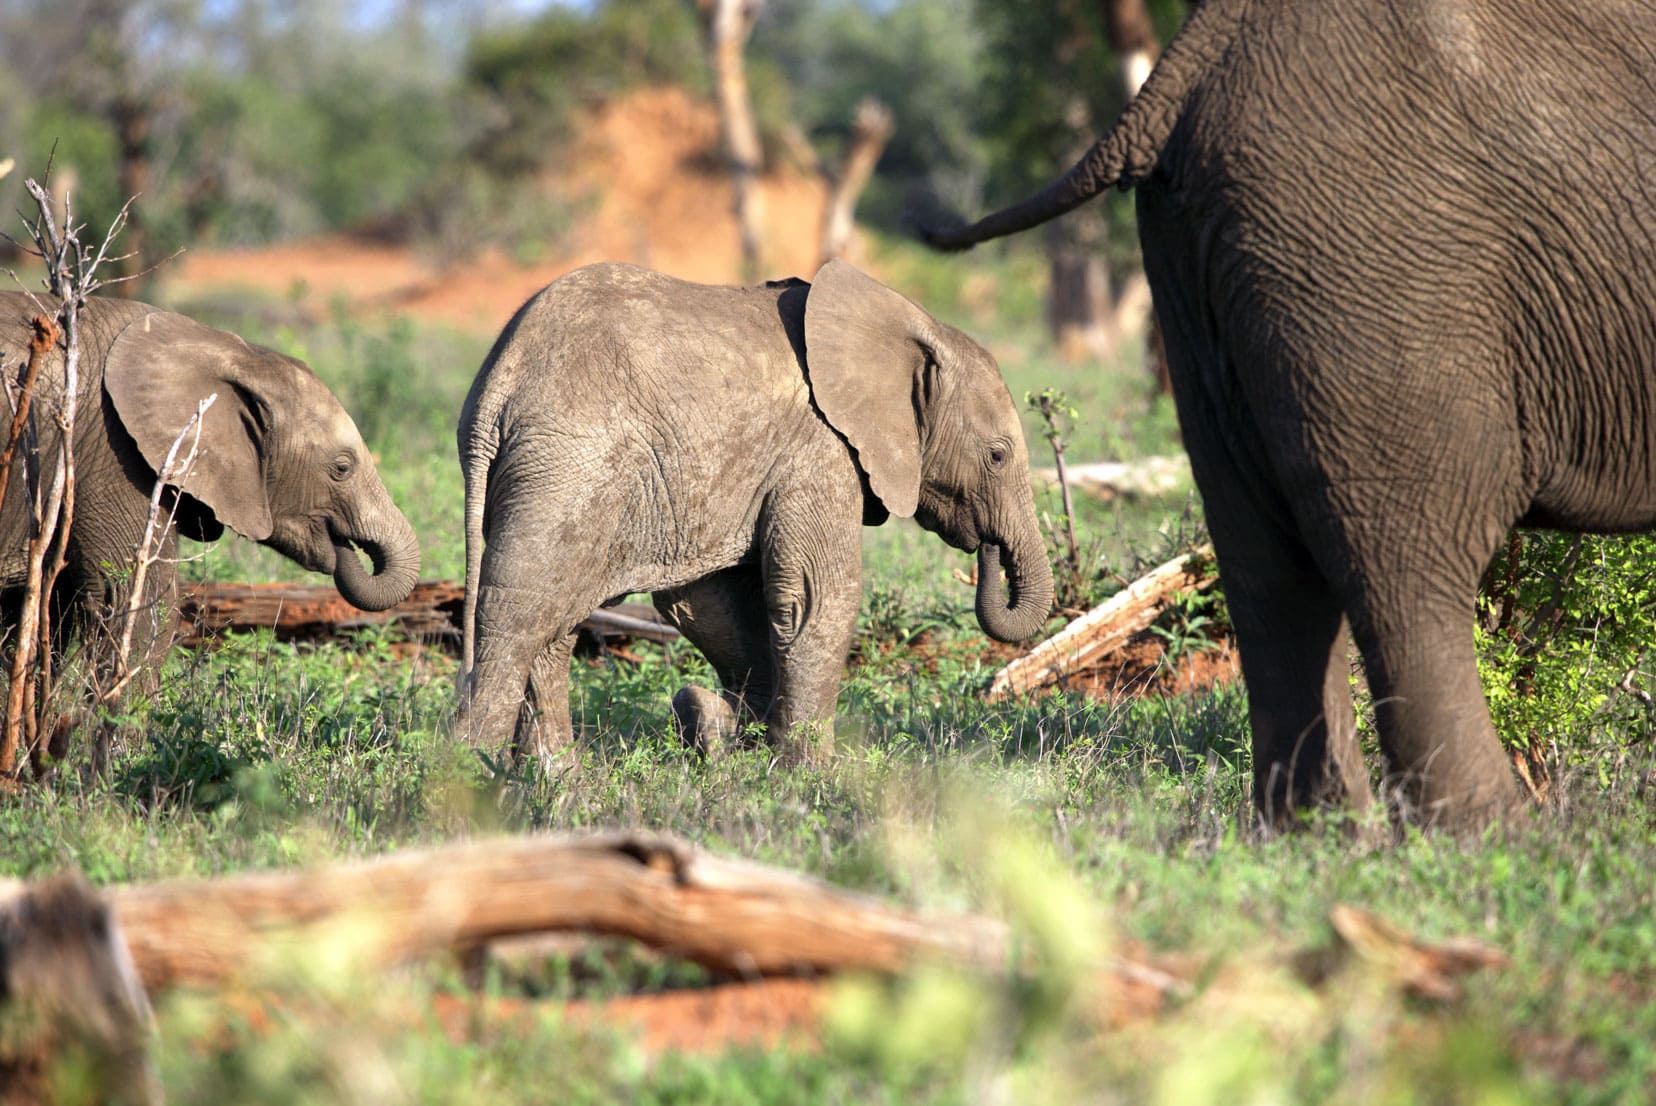 Two small elephant babies sucking their trunks 